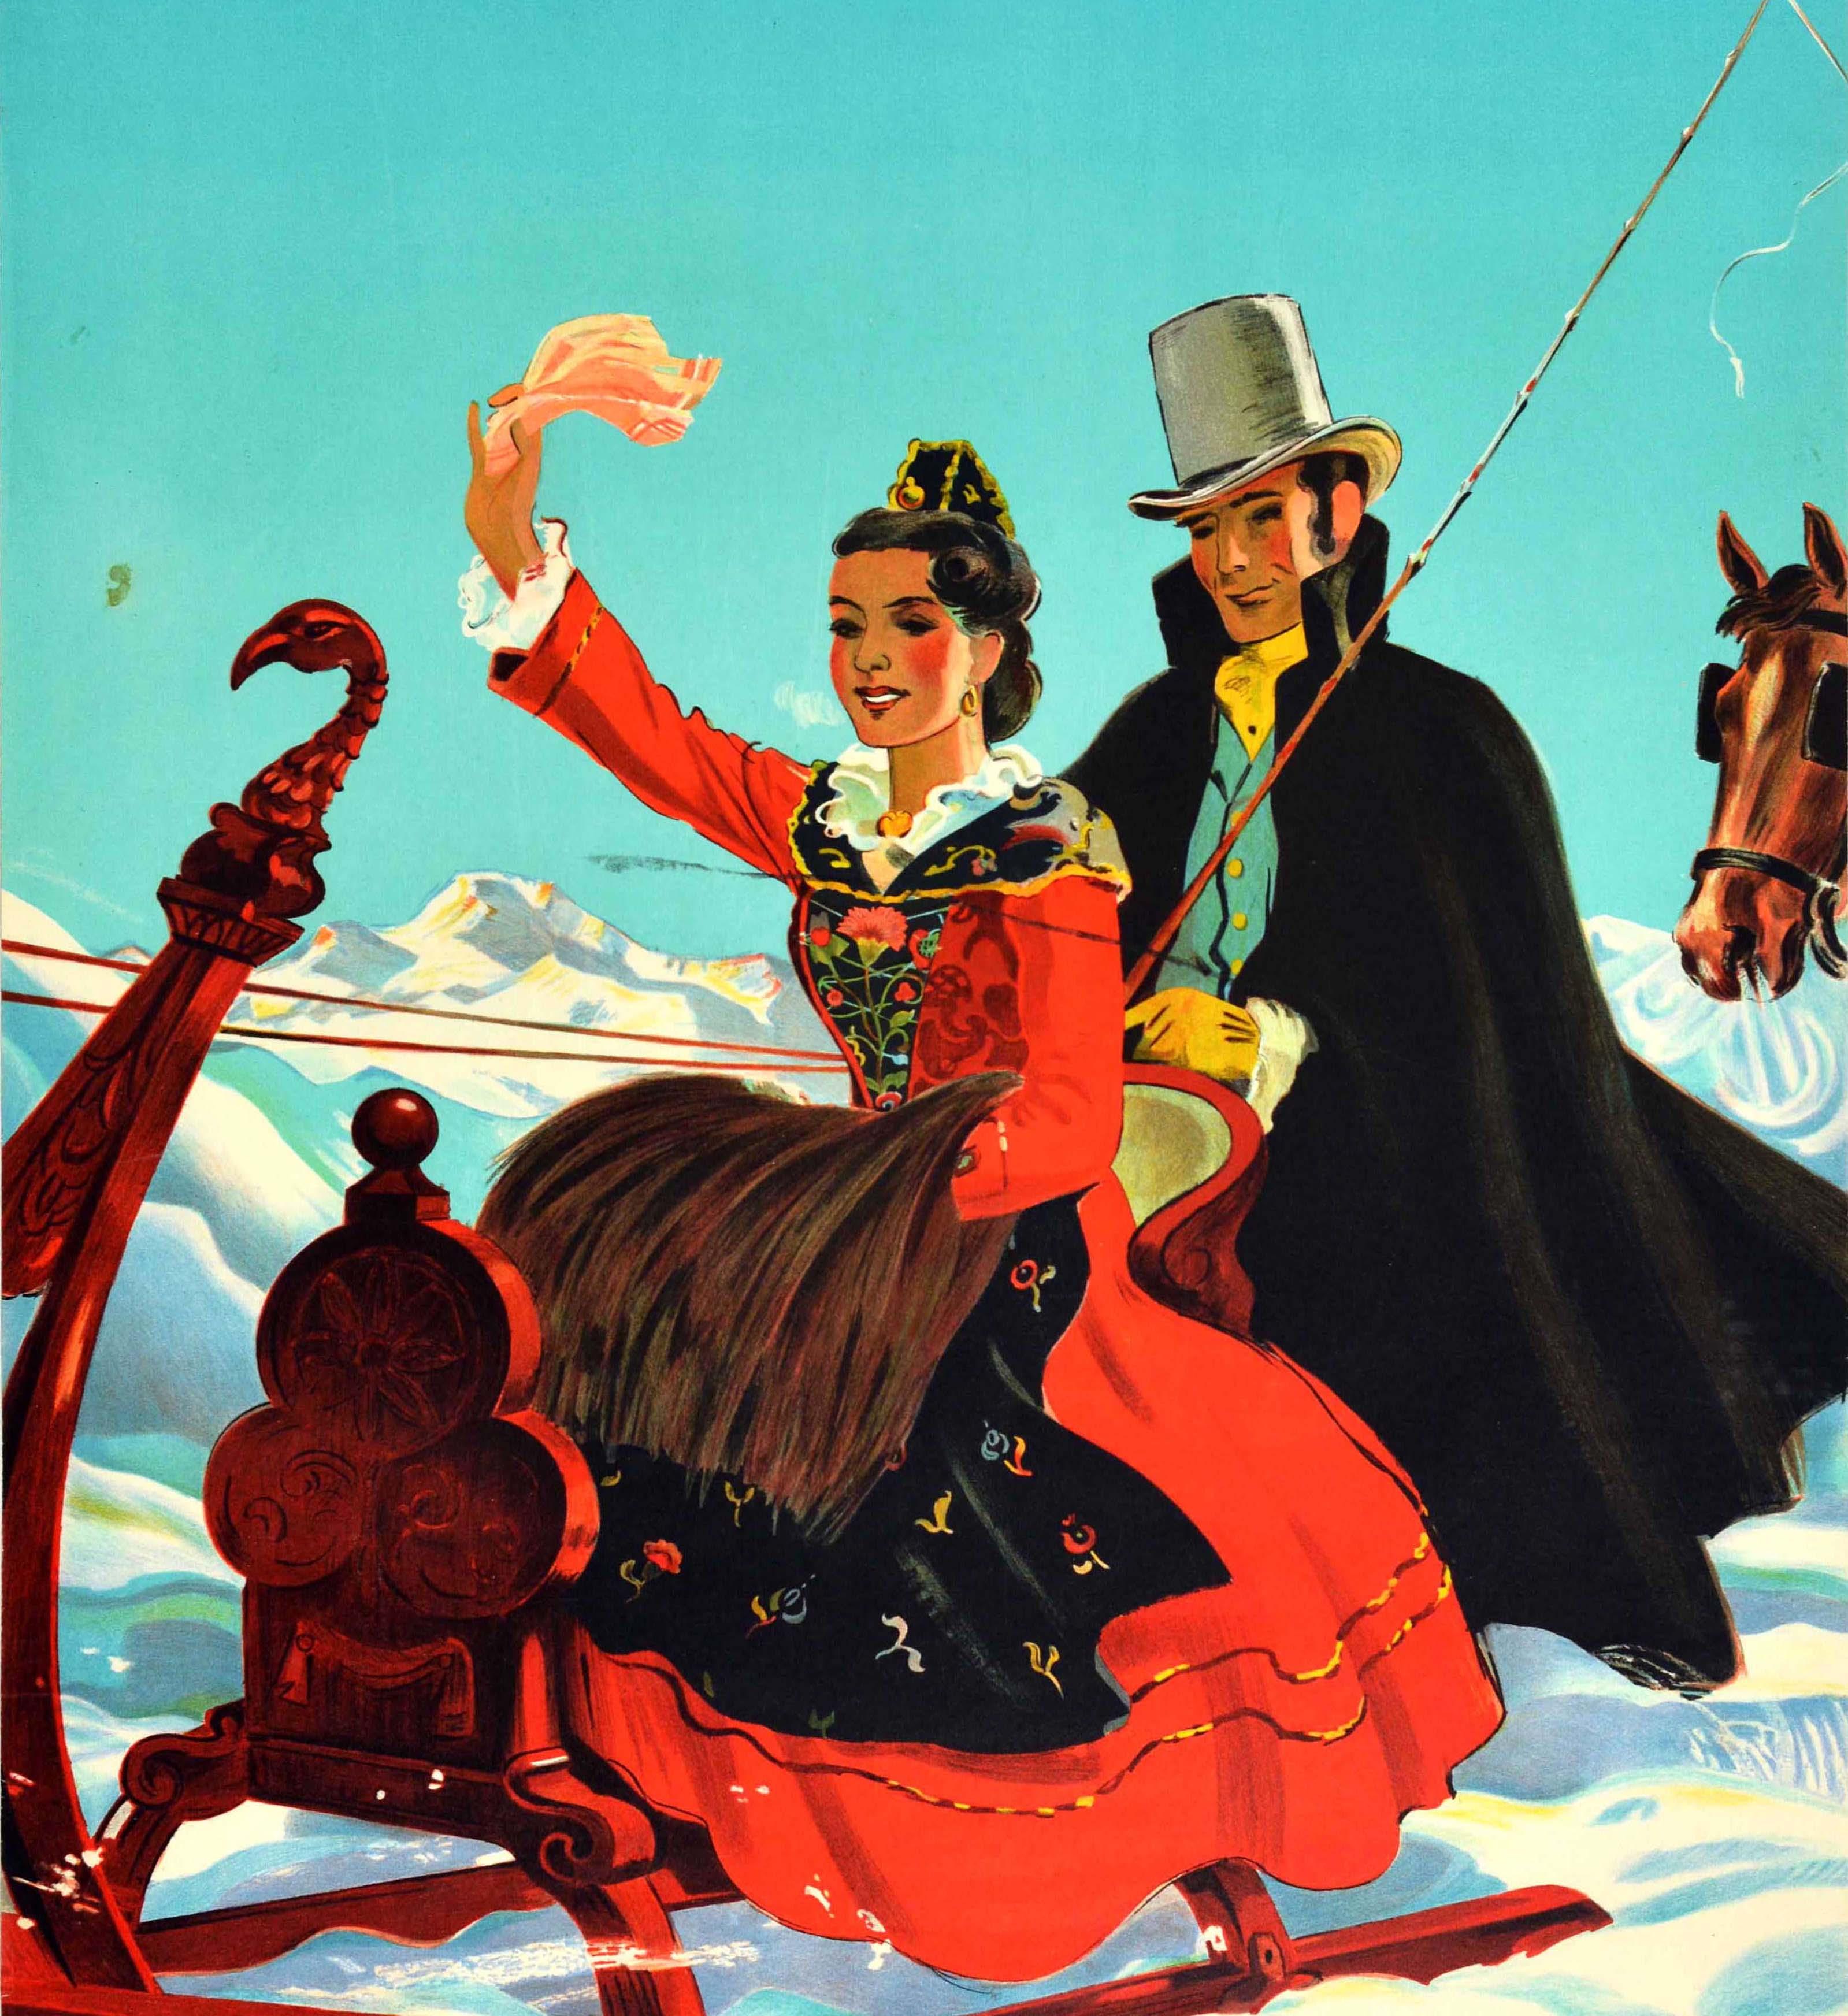 Original vintage travel poster for St Moritz featuring a great design by Hugo Laubi (1888-1959) of a smiling lady in a traditional red dress waving a handkerchief as she rides on a carved wooden horse drawn sleigh / sledge driven by a smartly